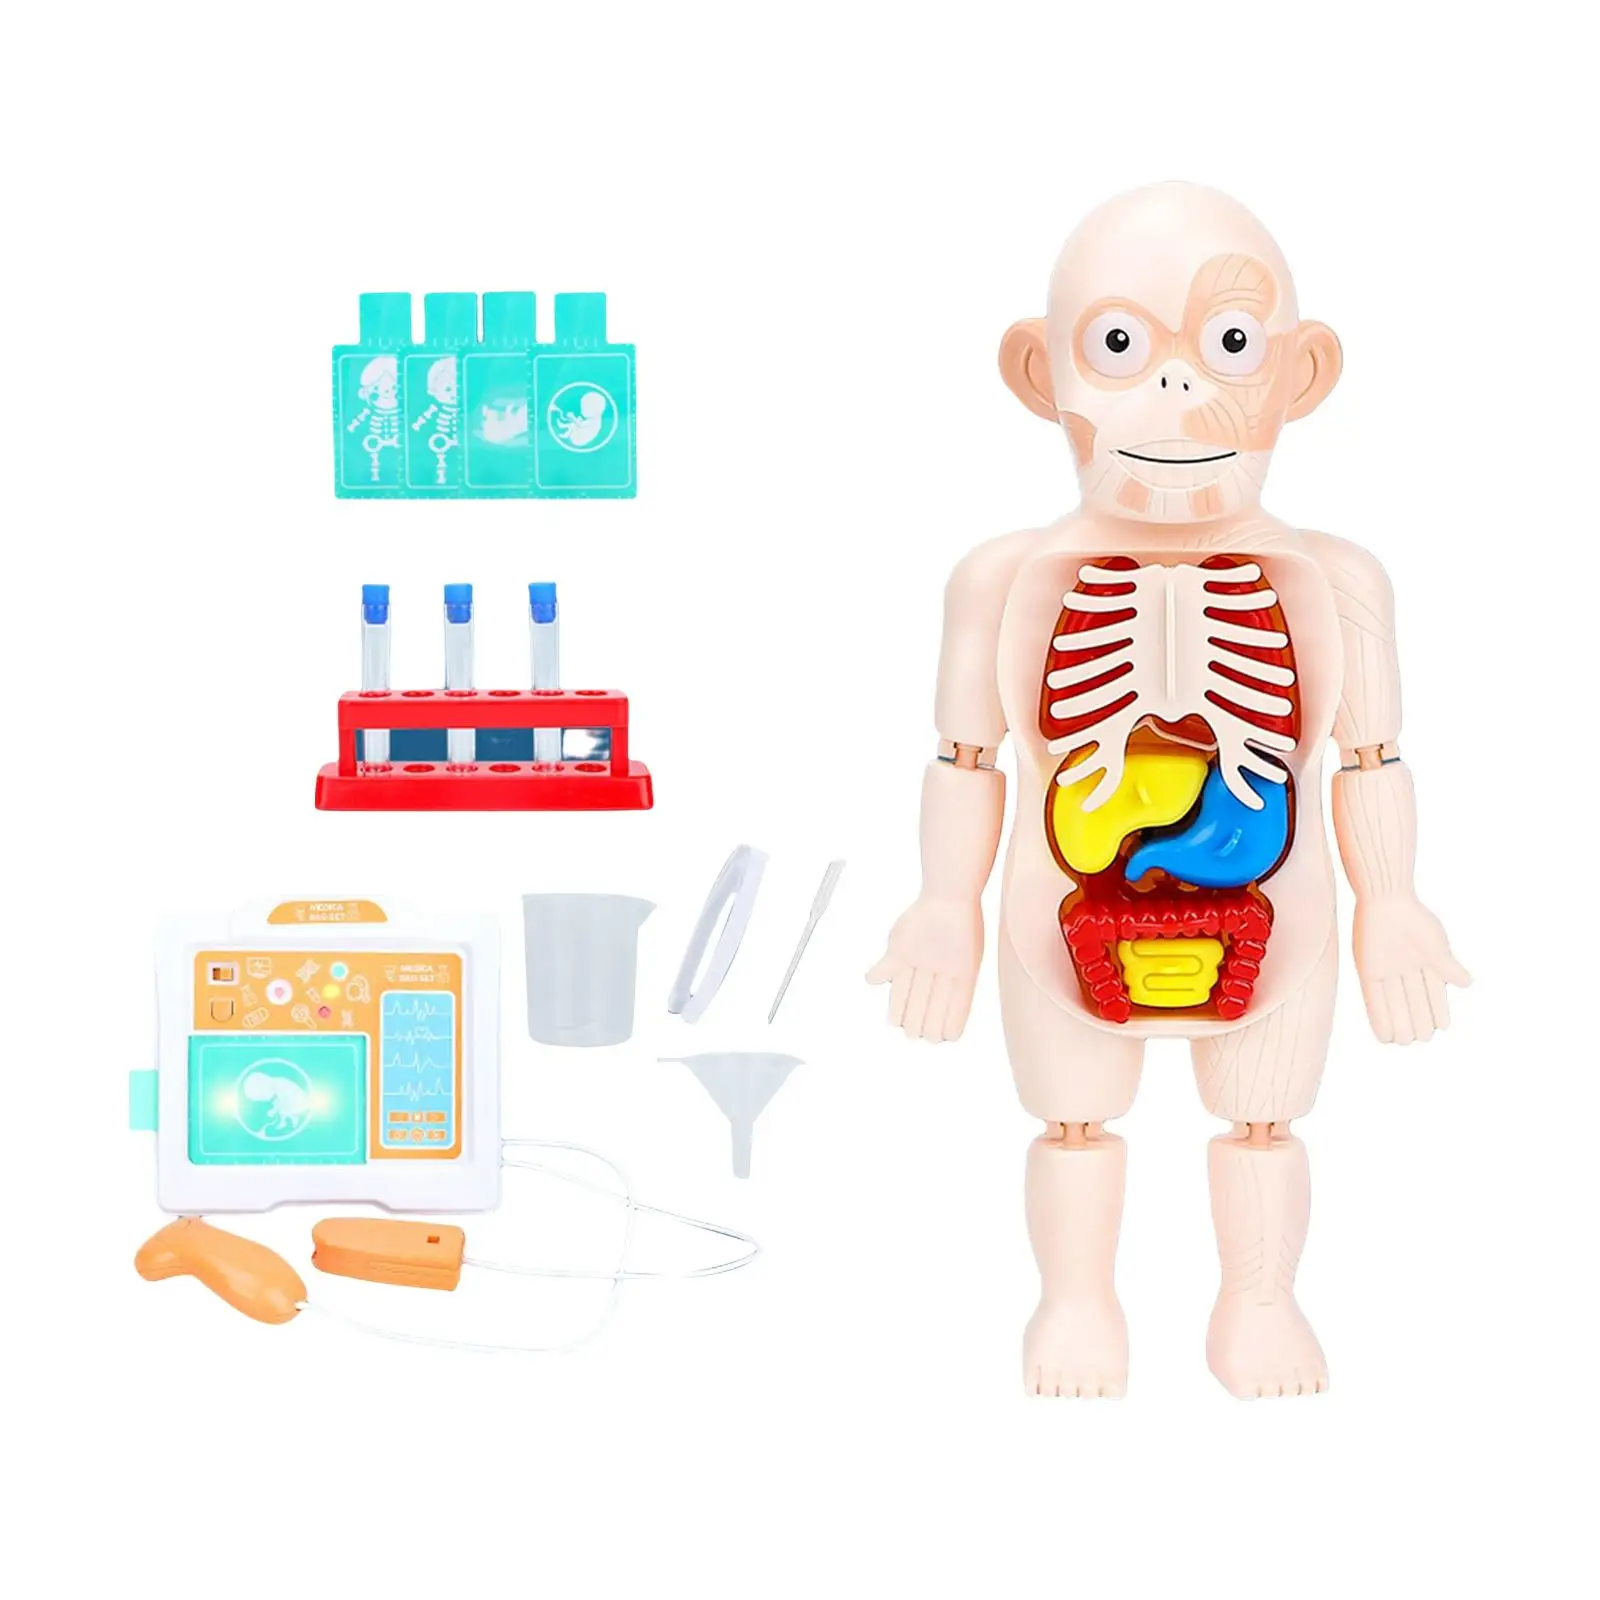 Human Body Model Development Toy Learning Activities Practical for Classroom